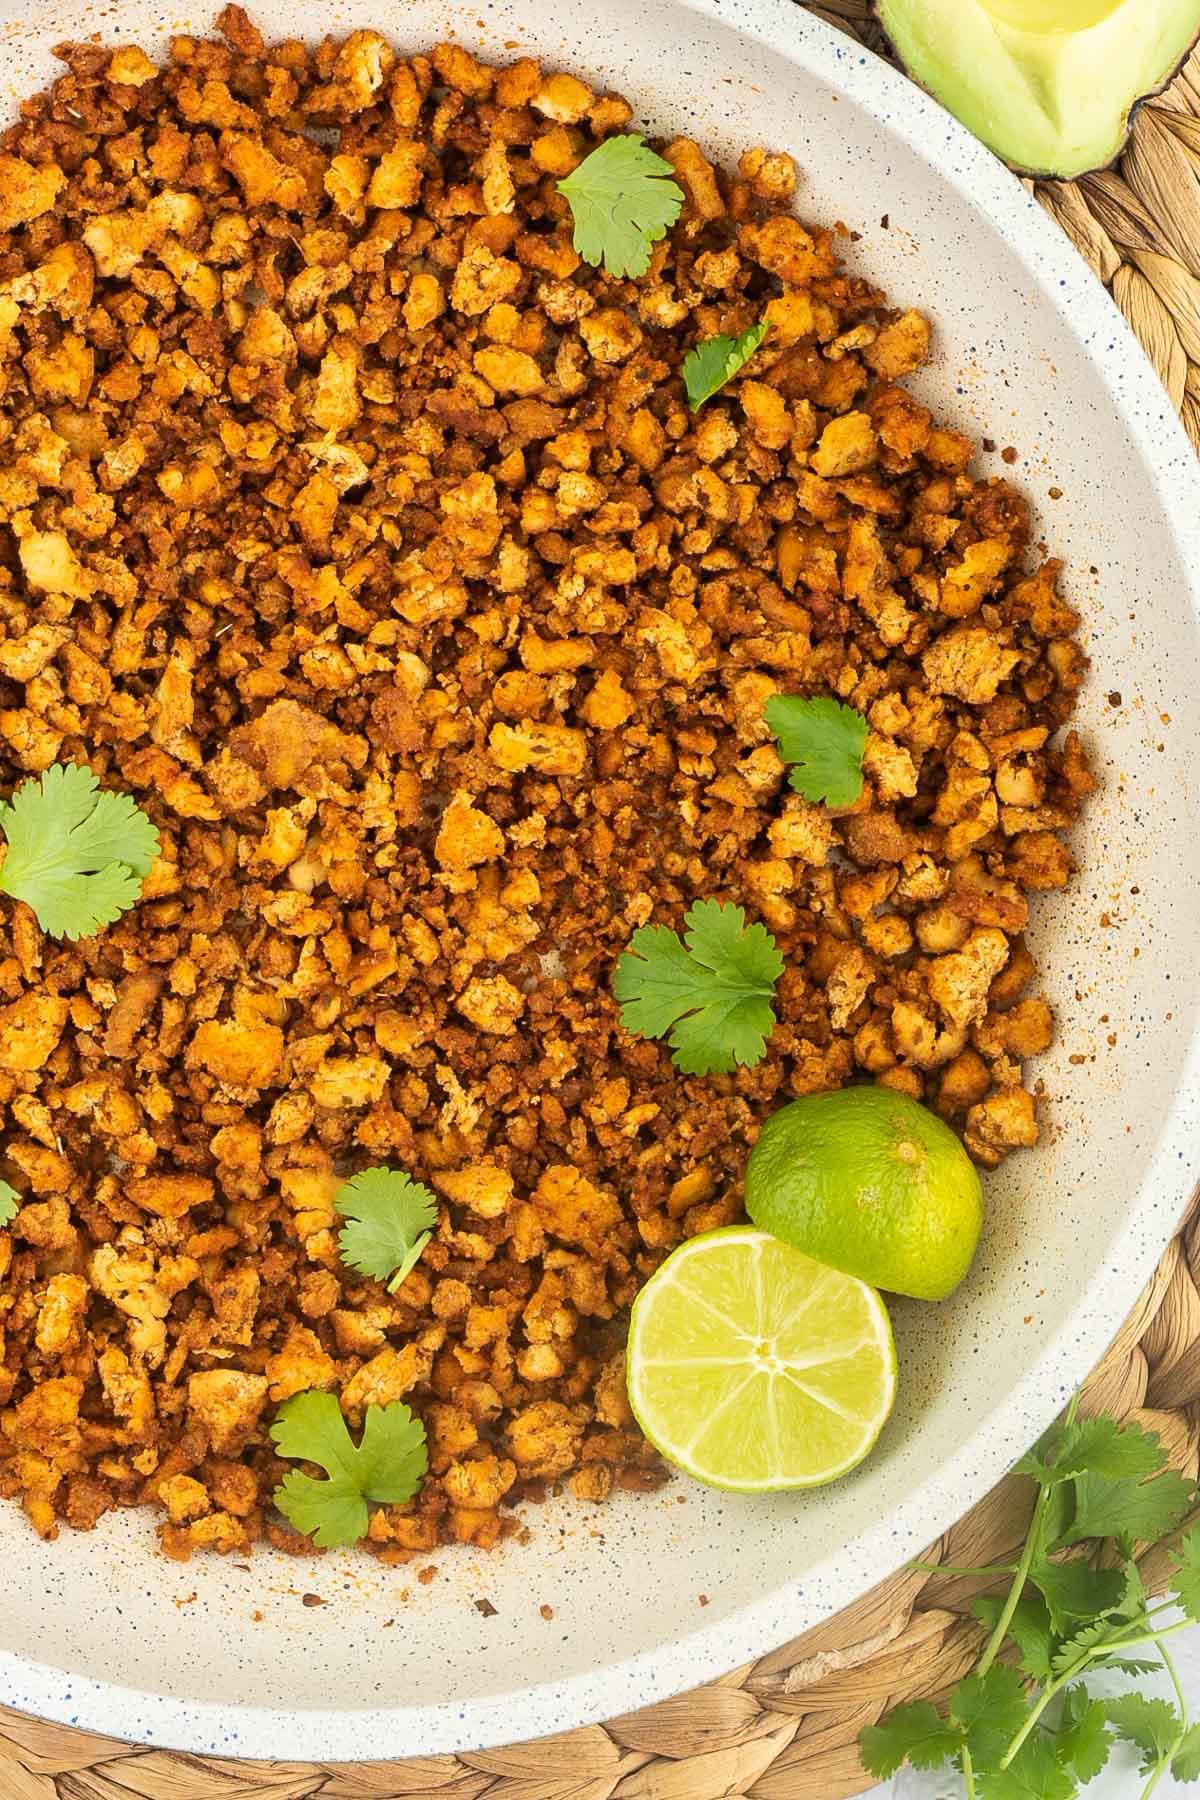 A white frying pan with brown crispy tofu crumbles sprinkled with freshly chopped cilantro. Lime slices are added.